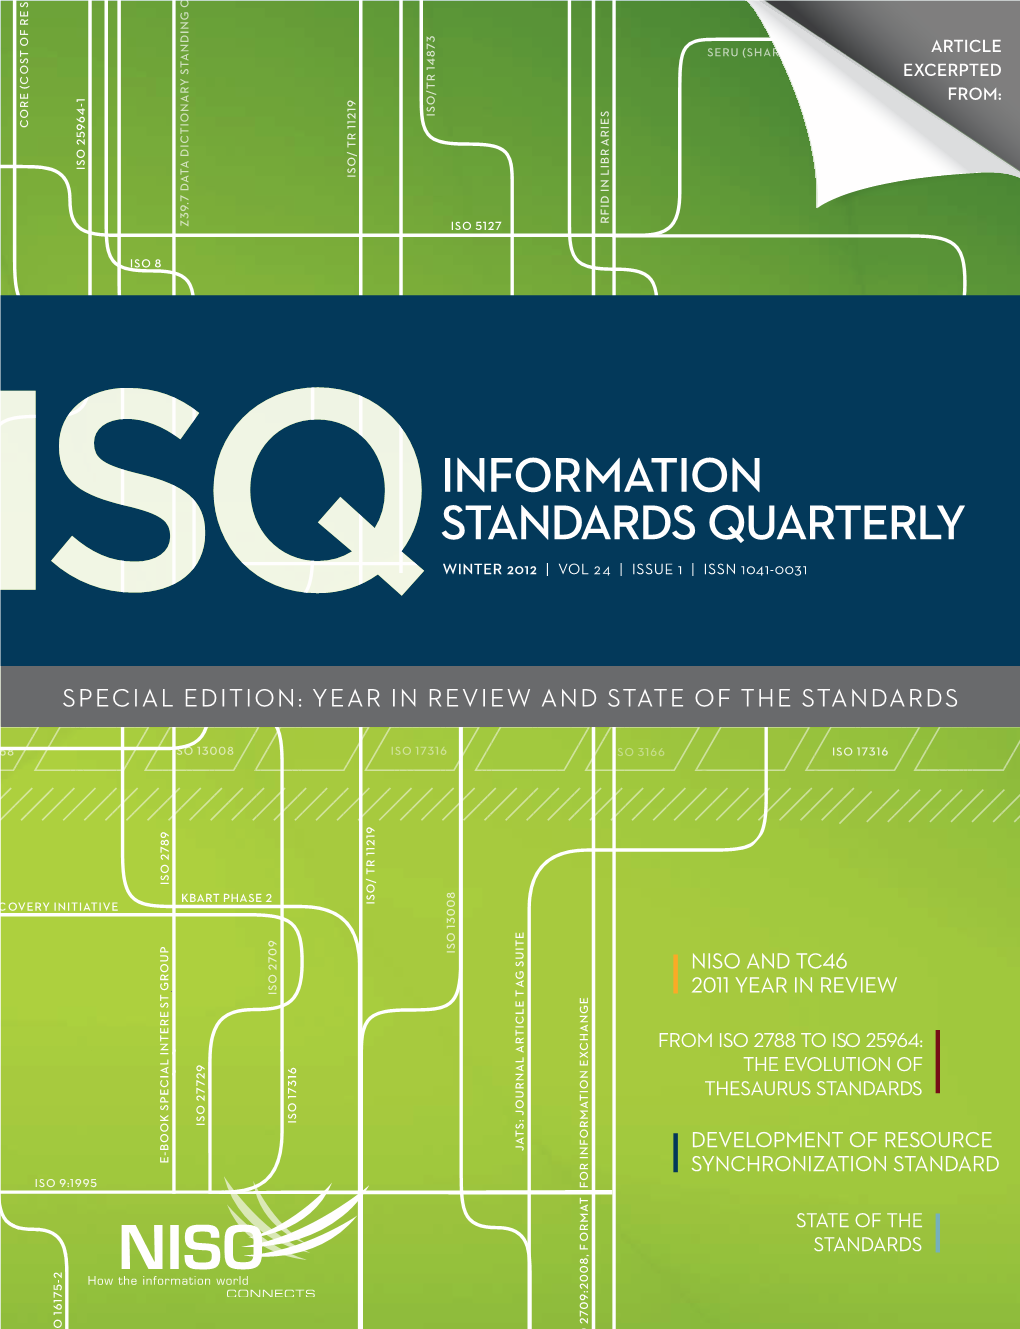 From ISO 2788 to ISO 25964: the Evolution of Thesaurus Standards O 17316 O 27729 IS IS I Cle T S: Journal a Rt AT